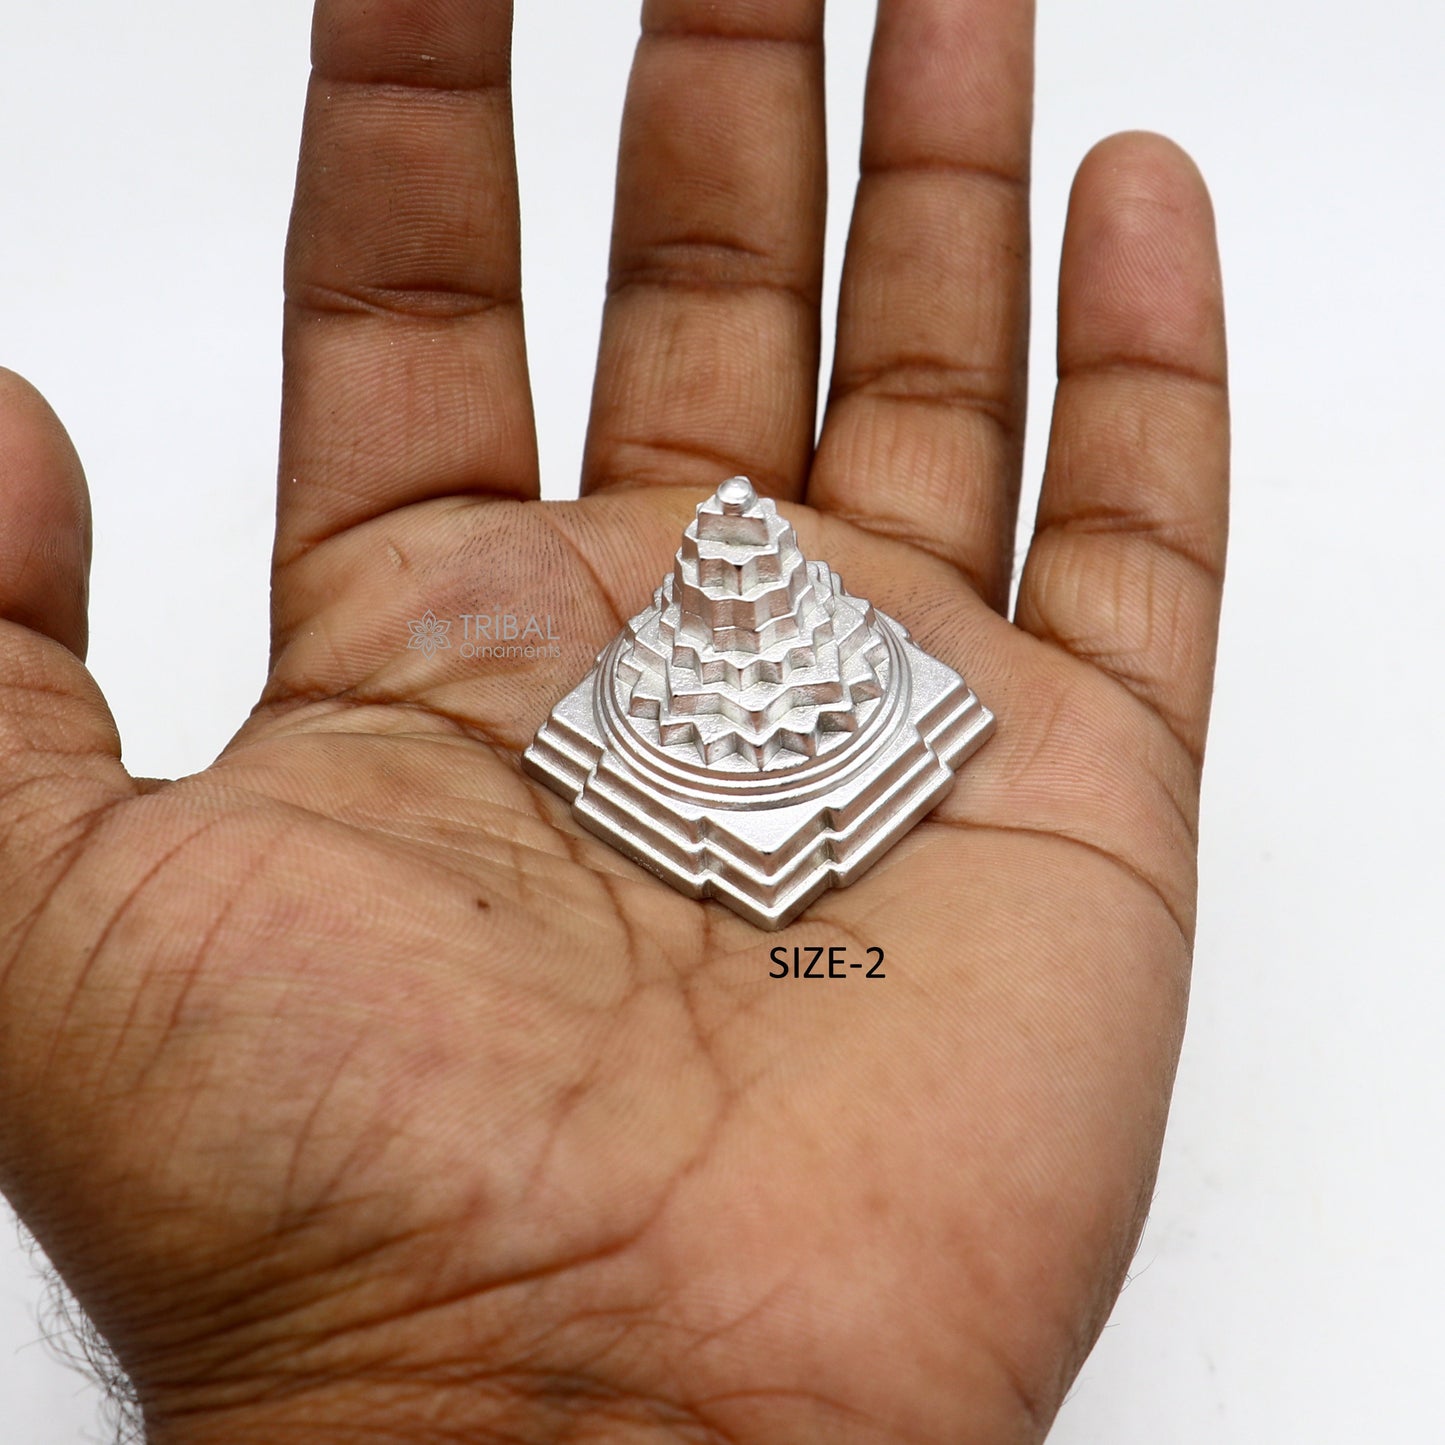 Divine Solid mercury 3d pyramid of shree yantra, Parad Mahalakshmi Yantram figurine for puja at home best way for wealth and prosperity MA25 - TRIBAL ORNAMENTS